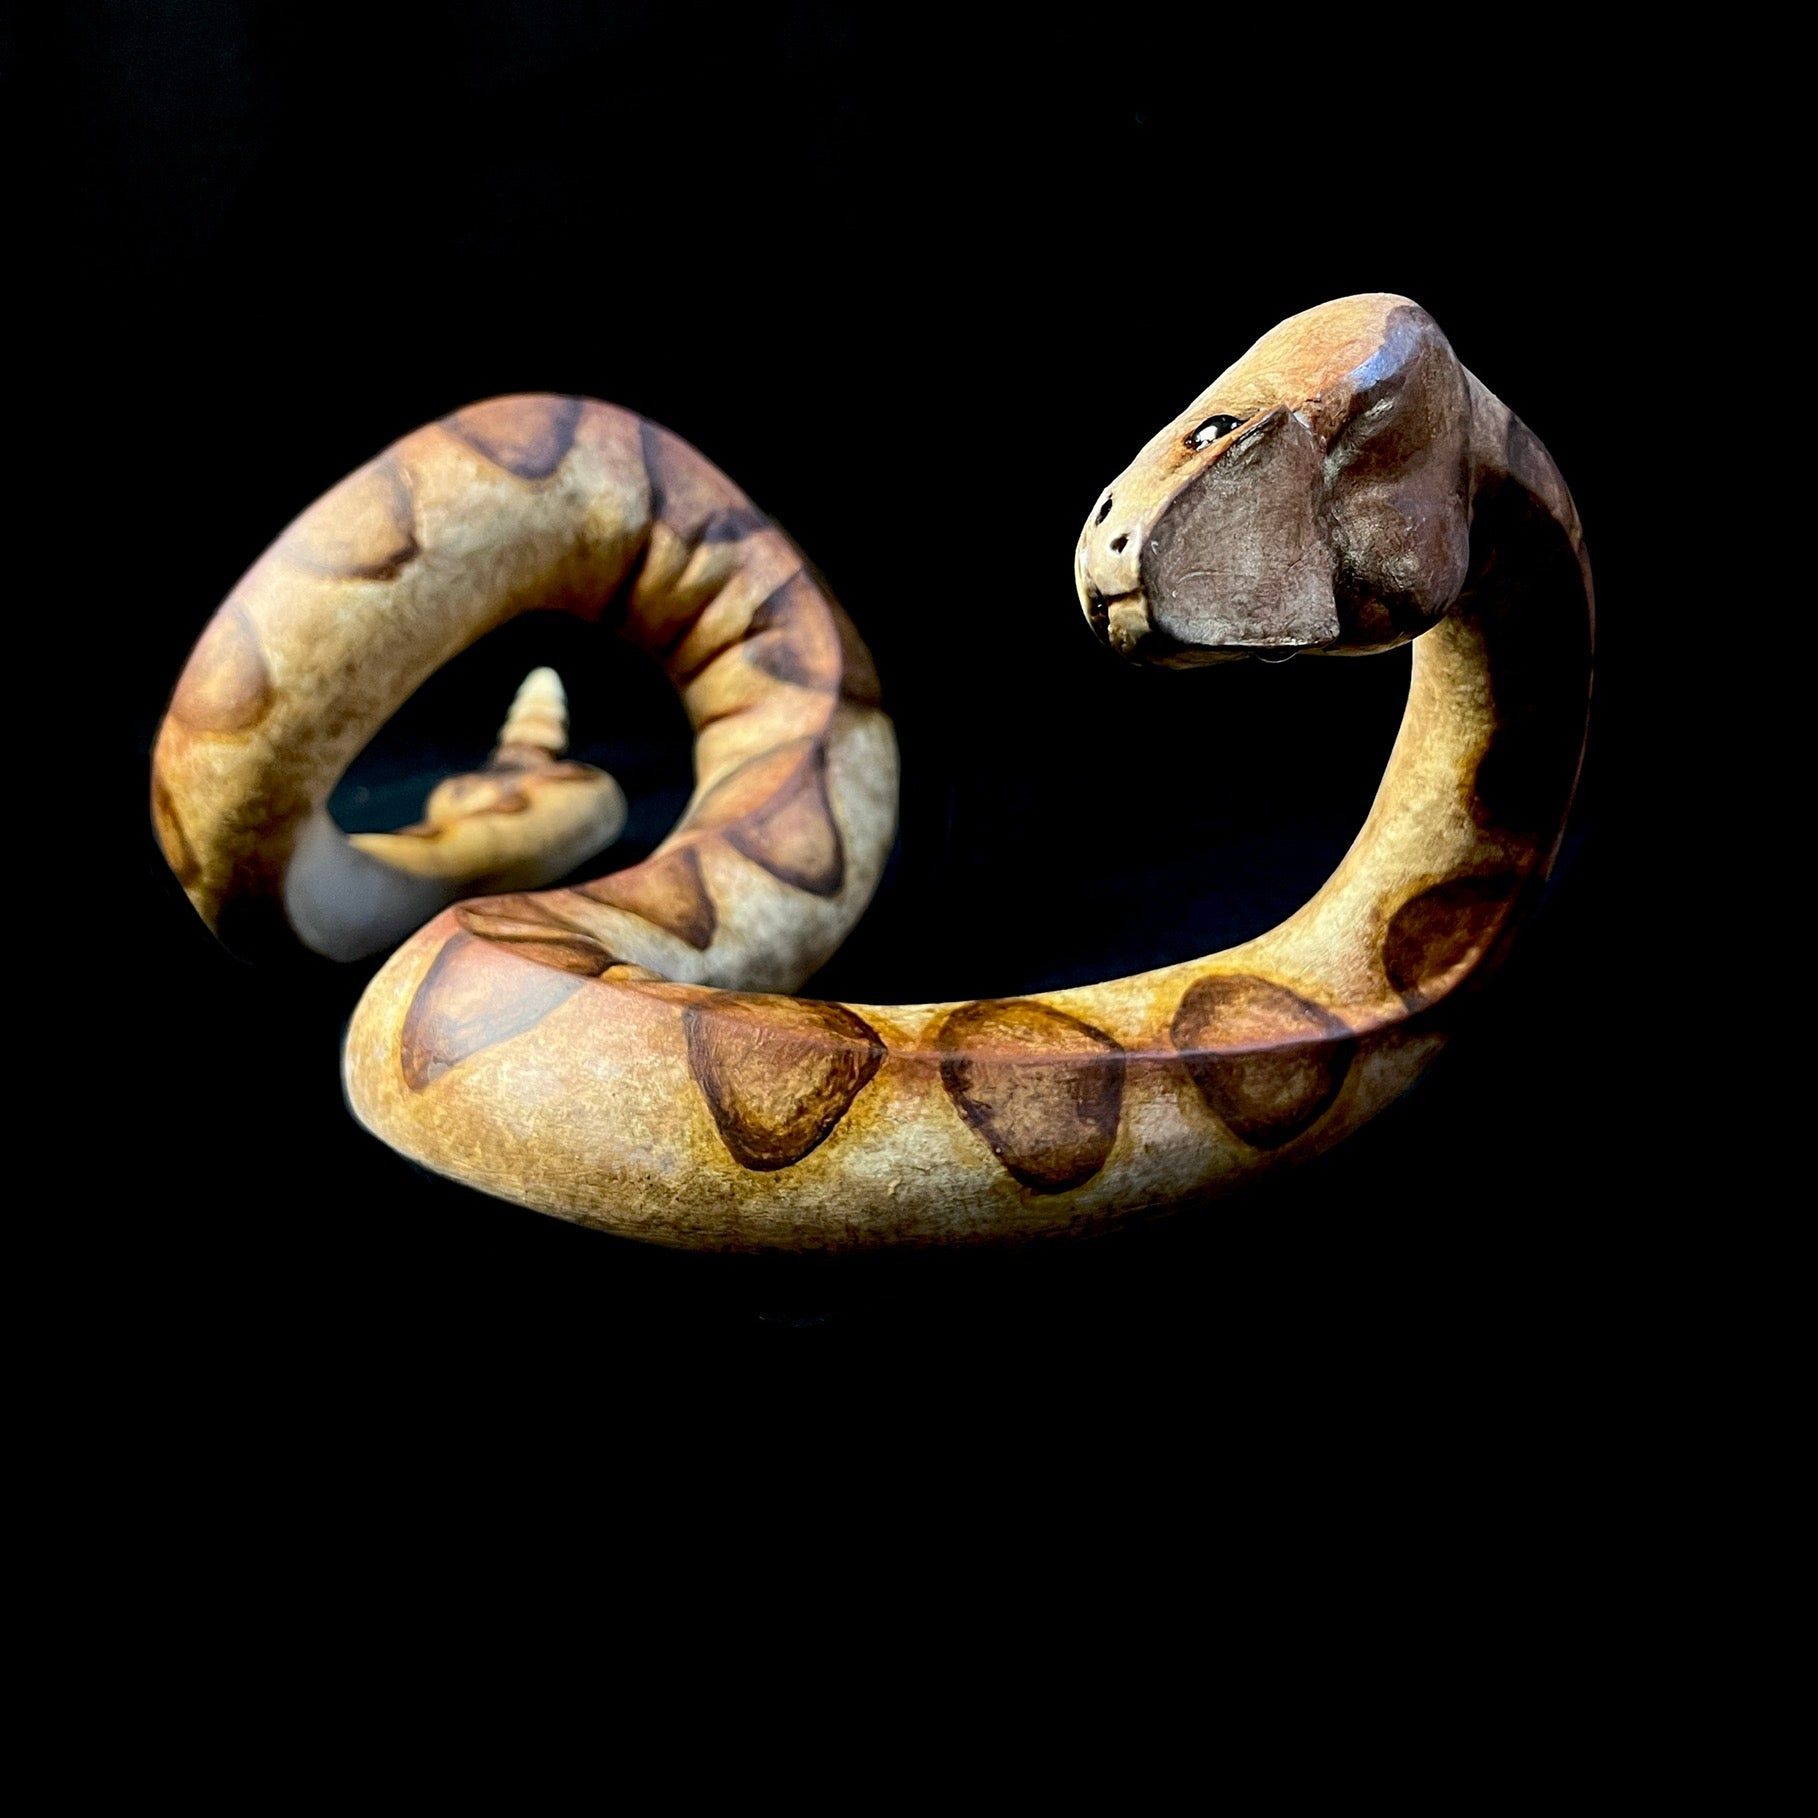 Top view of snake sculpture to show depth and painted pattern detail